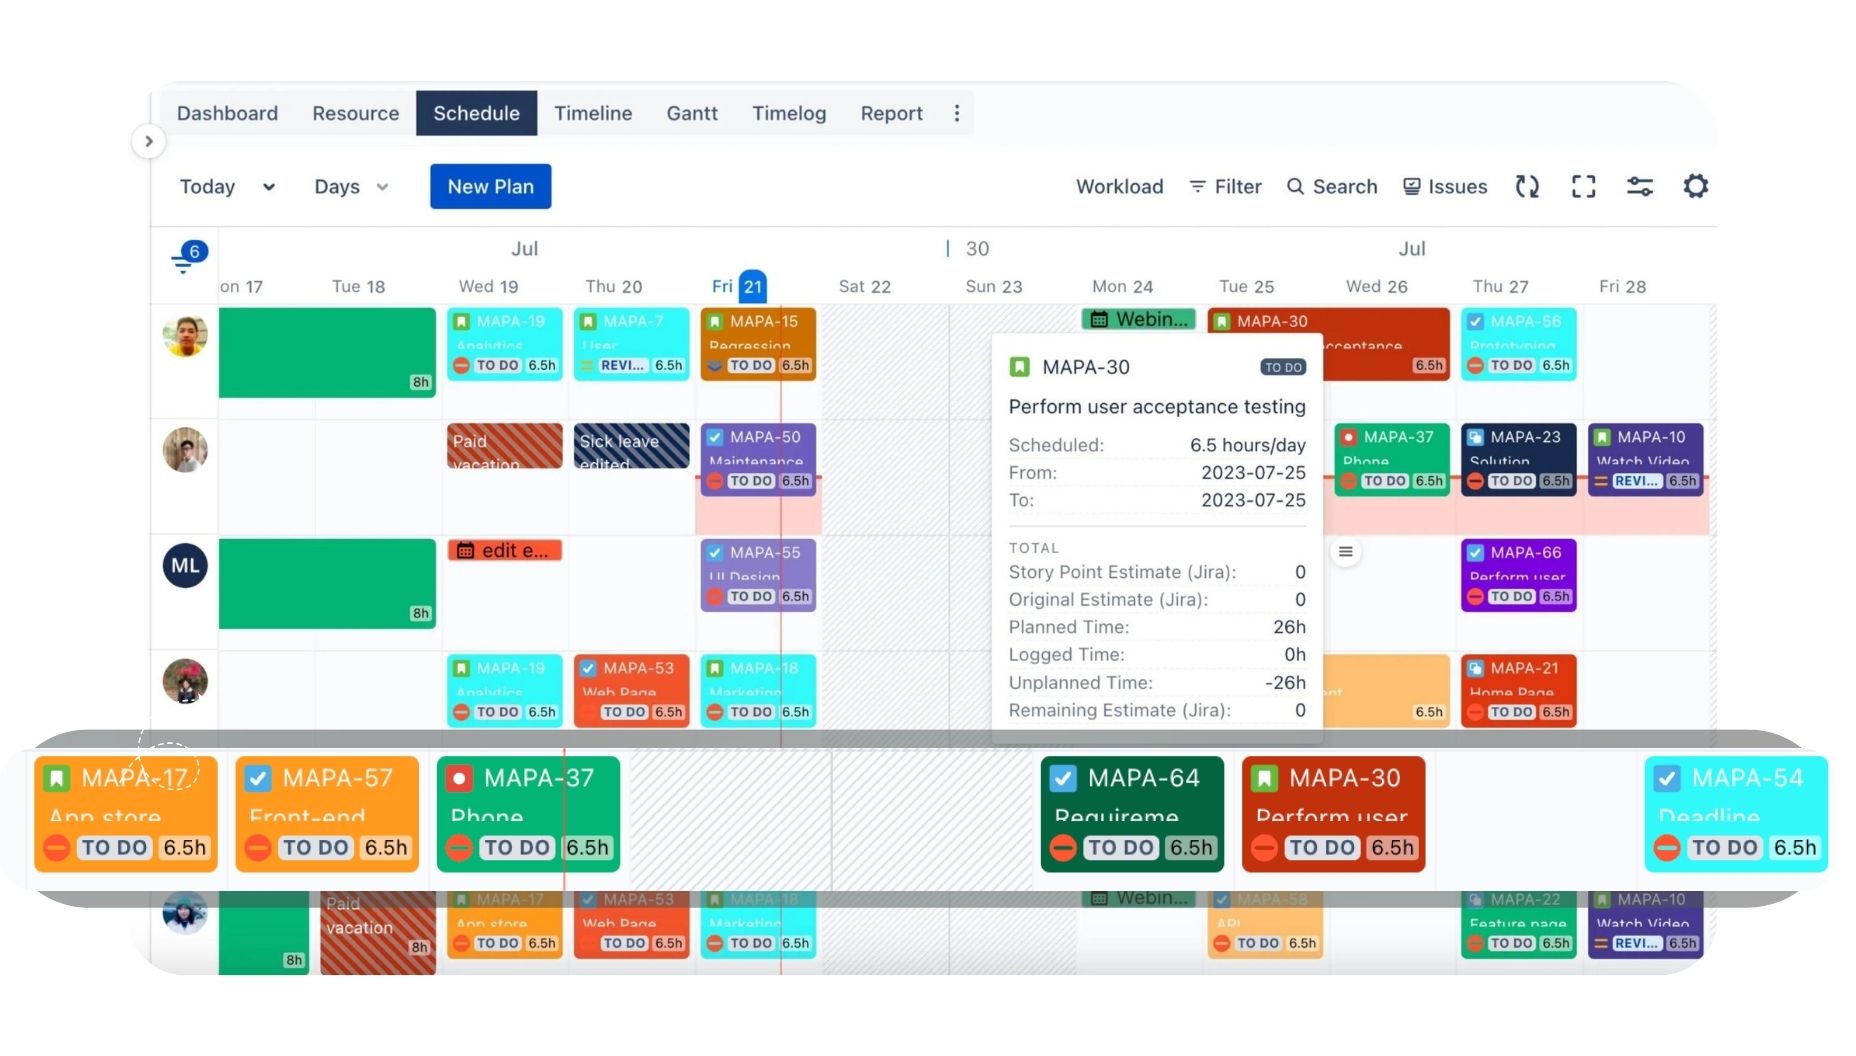 Empower Your IT Team with Teamboard